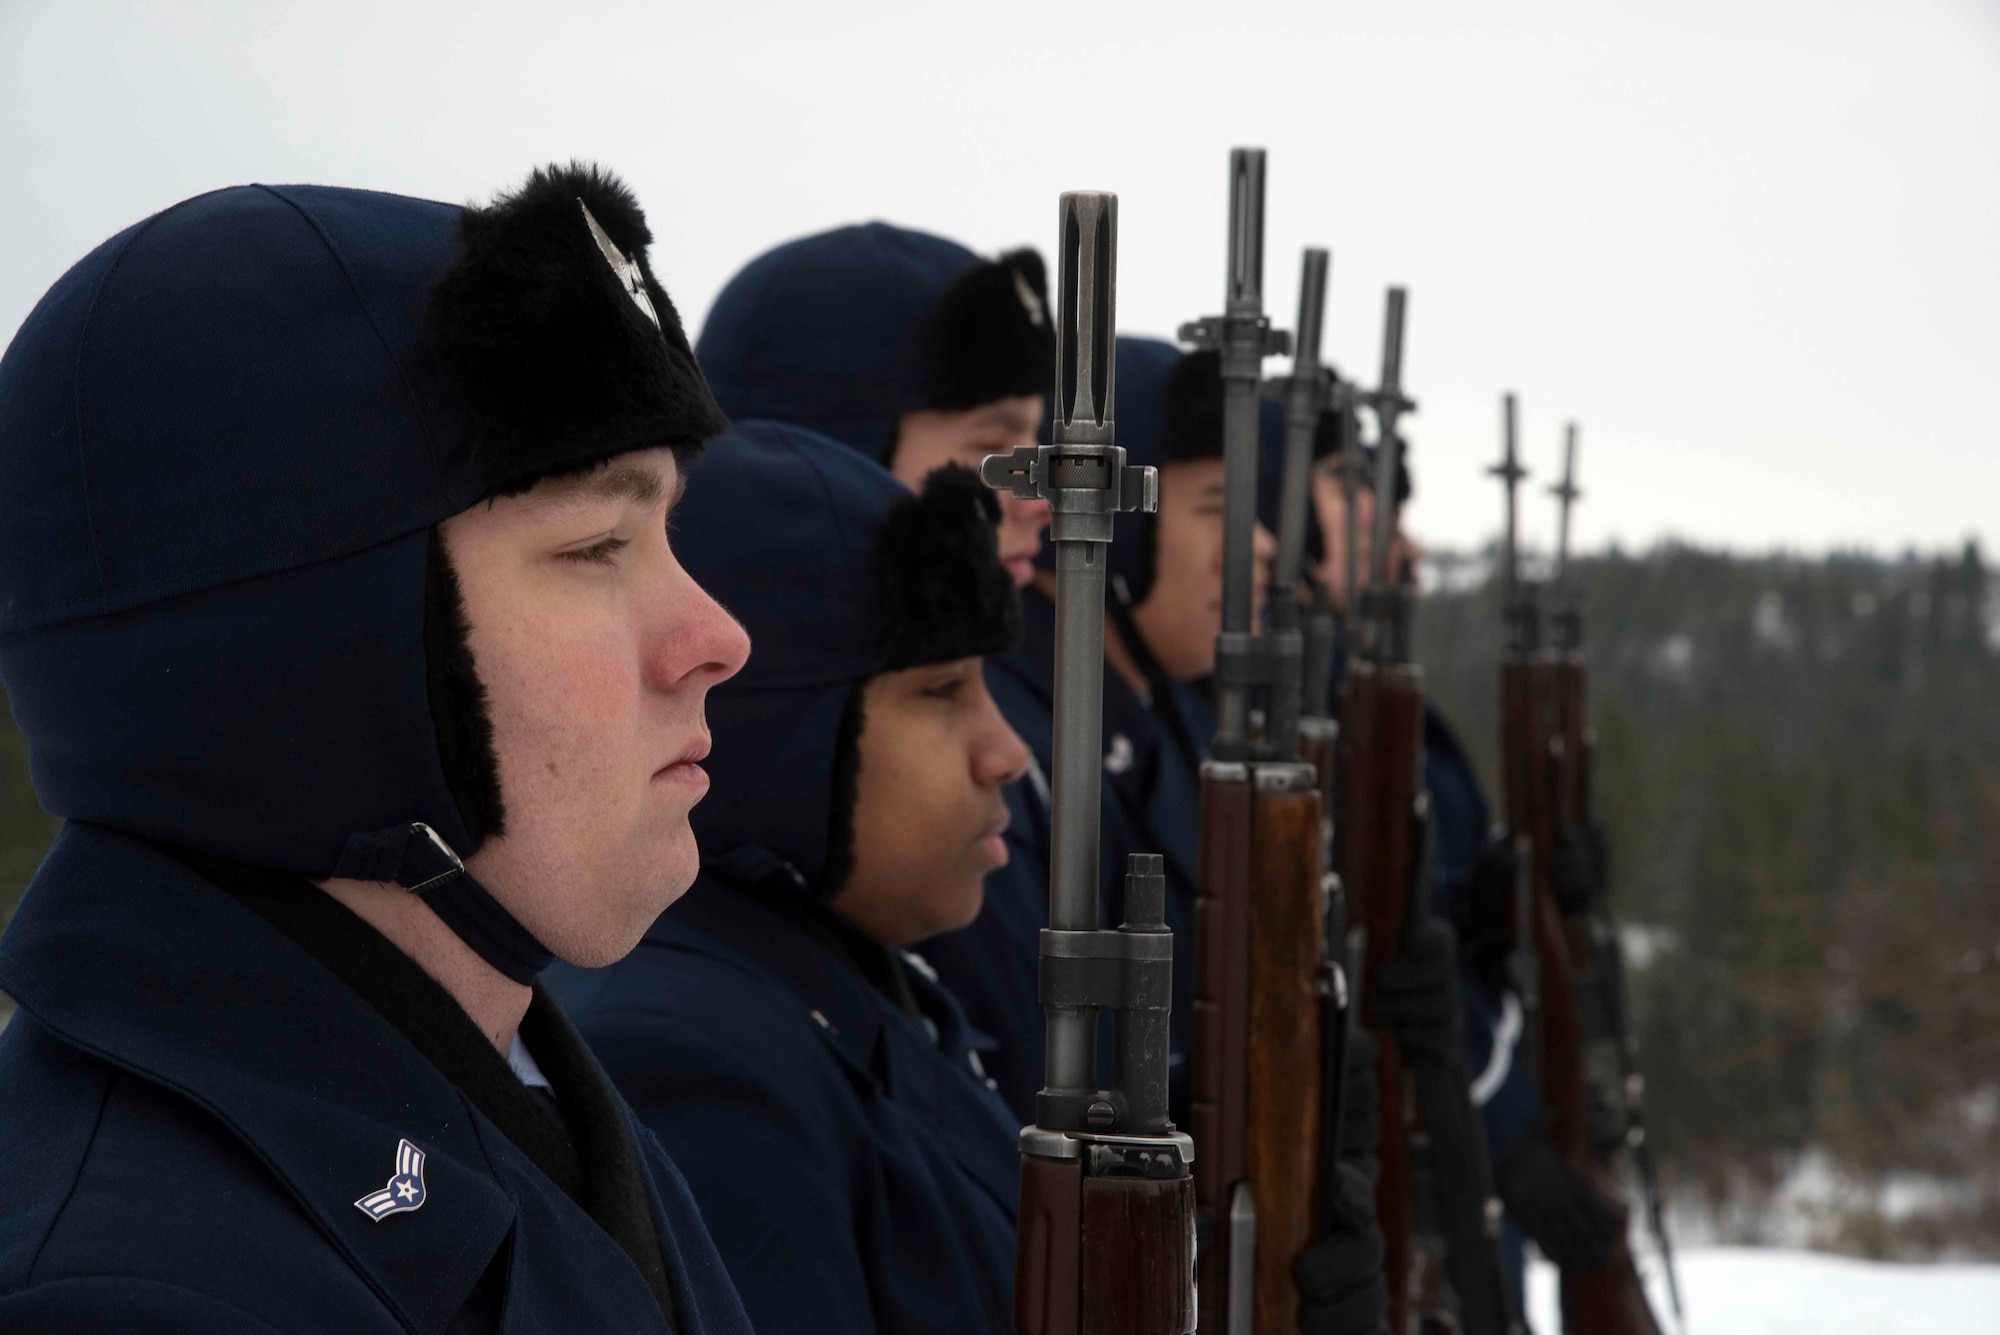 Fairchild ceremonial guardsmen present arms Dec. 19, 2016, at Fort George Wright Cemetery, Spokane, Washington. Honor Guard details perform various functions for the base and local community but their primary mission is to provide funeral honors for deceased military members. (U.S. Air Force photo/Senior Airman Nick J. Daniello)